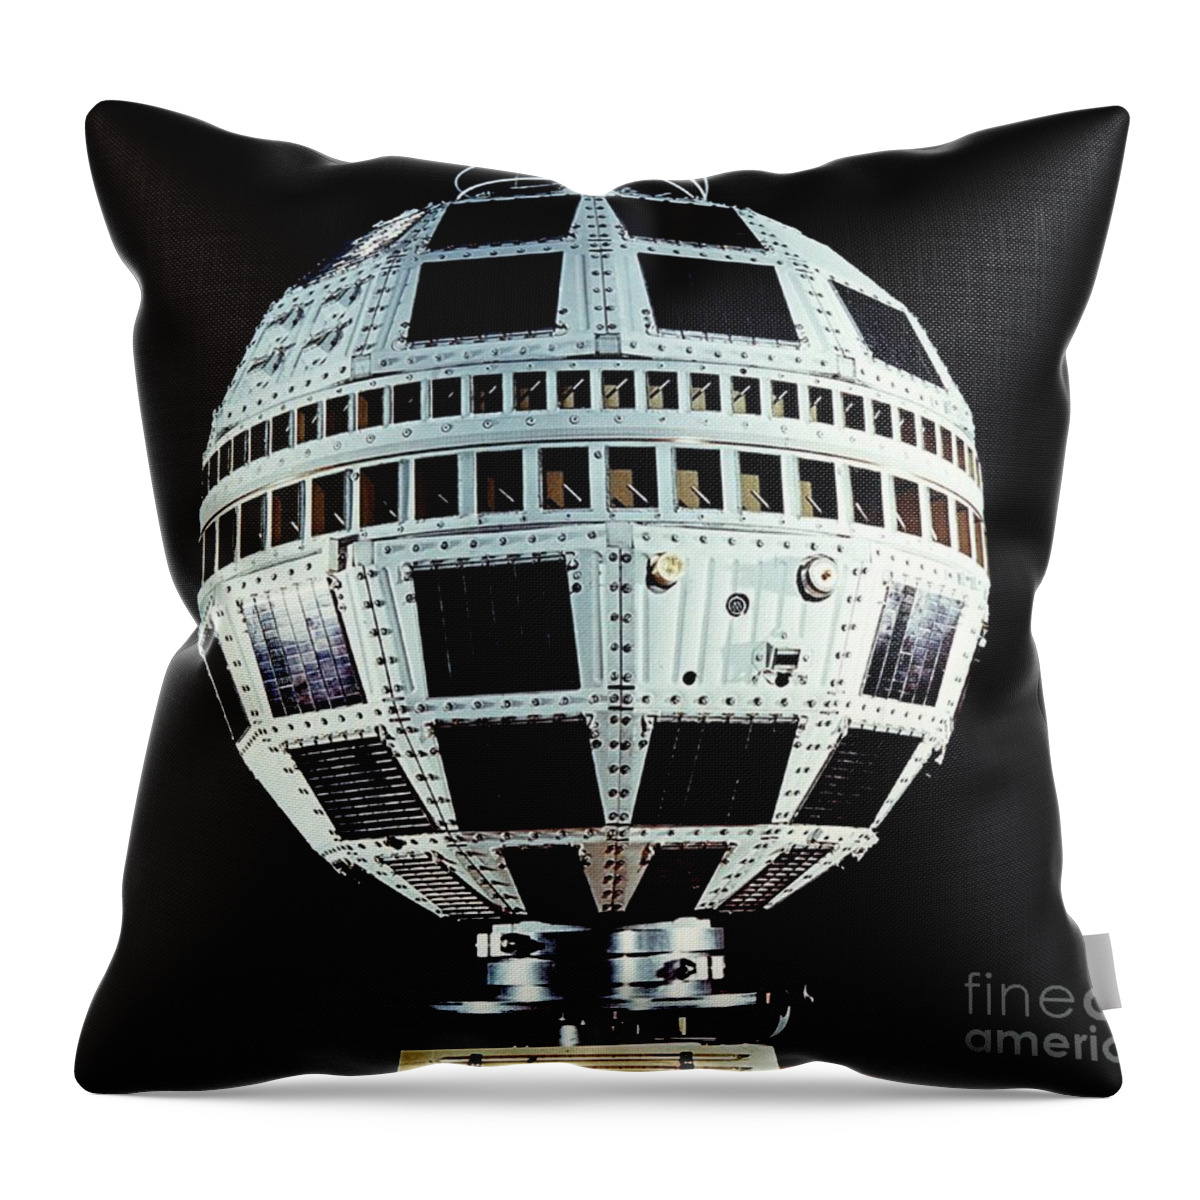 Communication Throw Pillow featuring the photograph Telstar 1 Before Launch by Alcatel-Lucent/Bell Labs